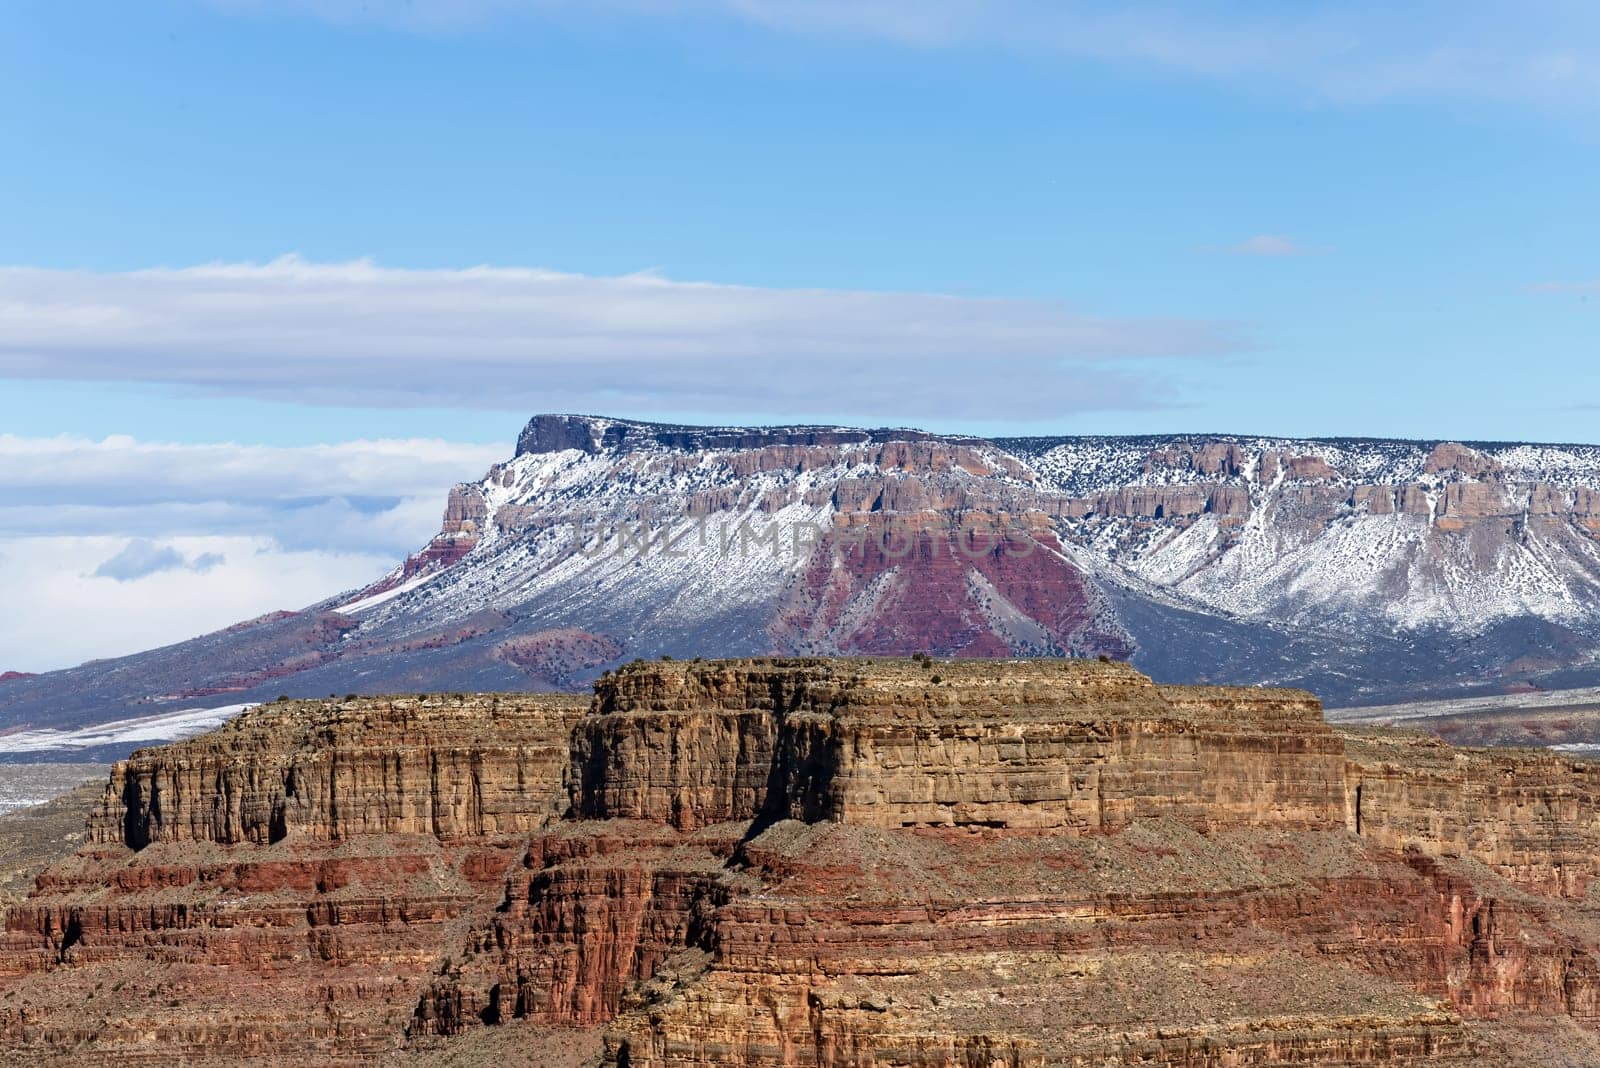 Experience ethereal beauty with this high-resolution photograph showcasing Grand Canyon West set against a sky gently kissed by clouds. The image captures the canyon's rugged red-rock formations reaching toward the heavenly horizon, as wisps of clouds float by, adding a dreamy softness to the tableau. The radiant blue sky provides a striking contrast, elevating the scene to surreal heights.